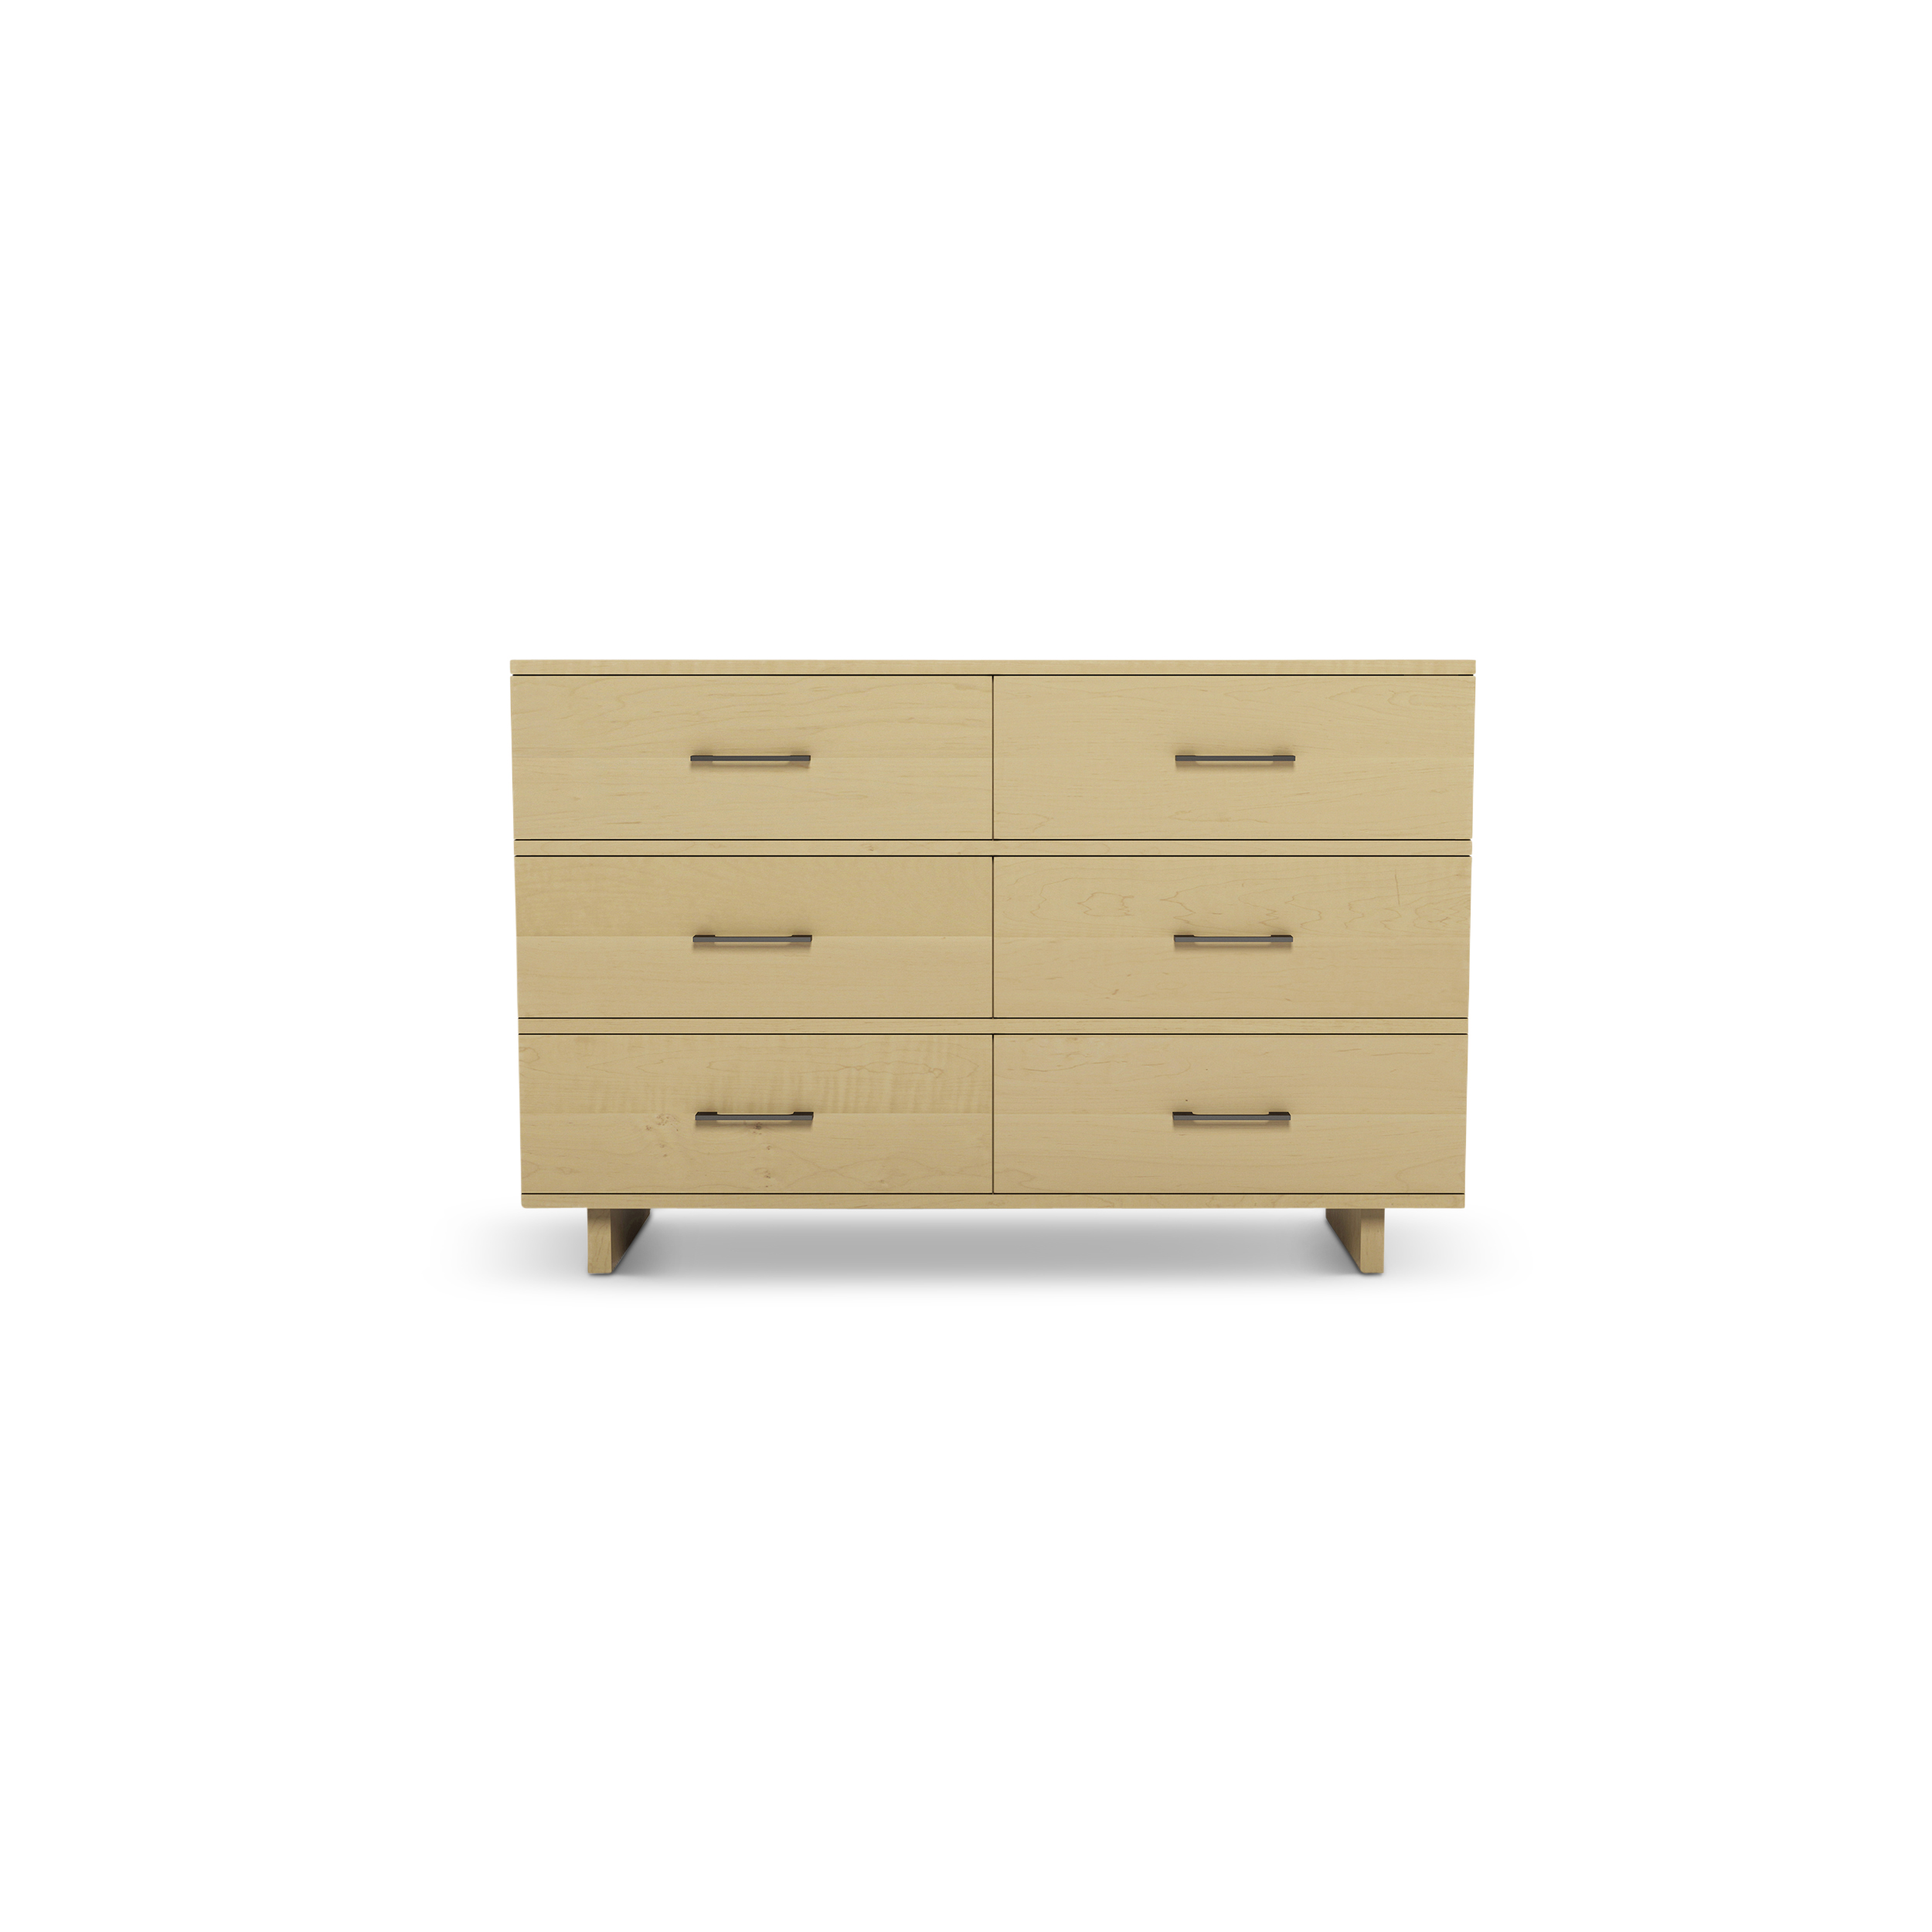 Series 252 Dresser With Six Drawers At 48″ In Width